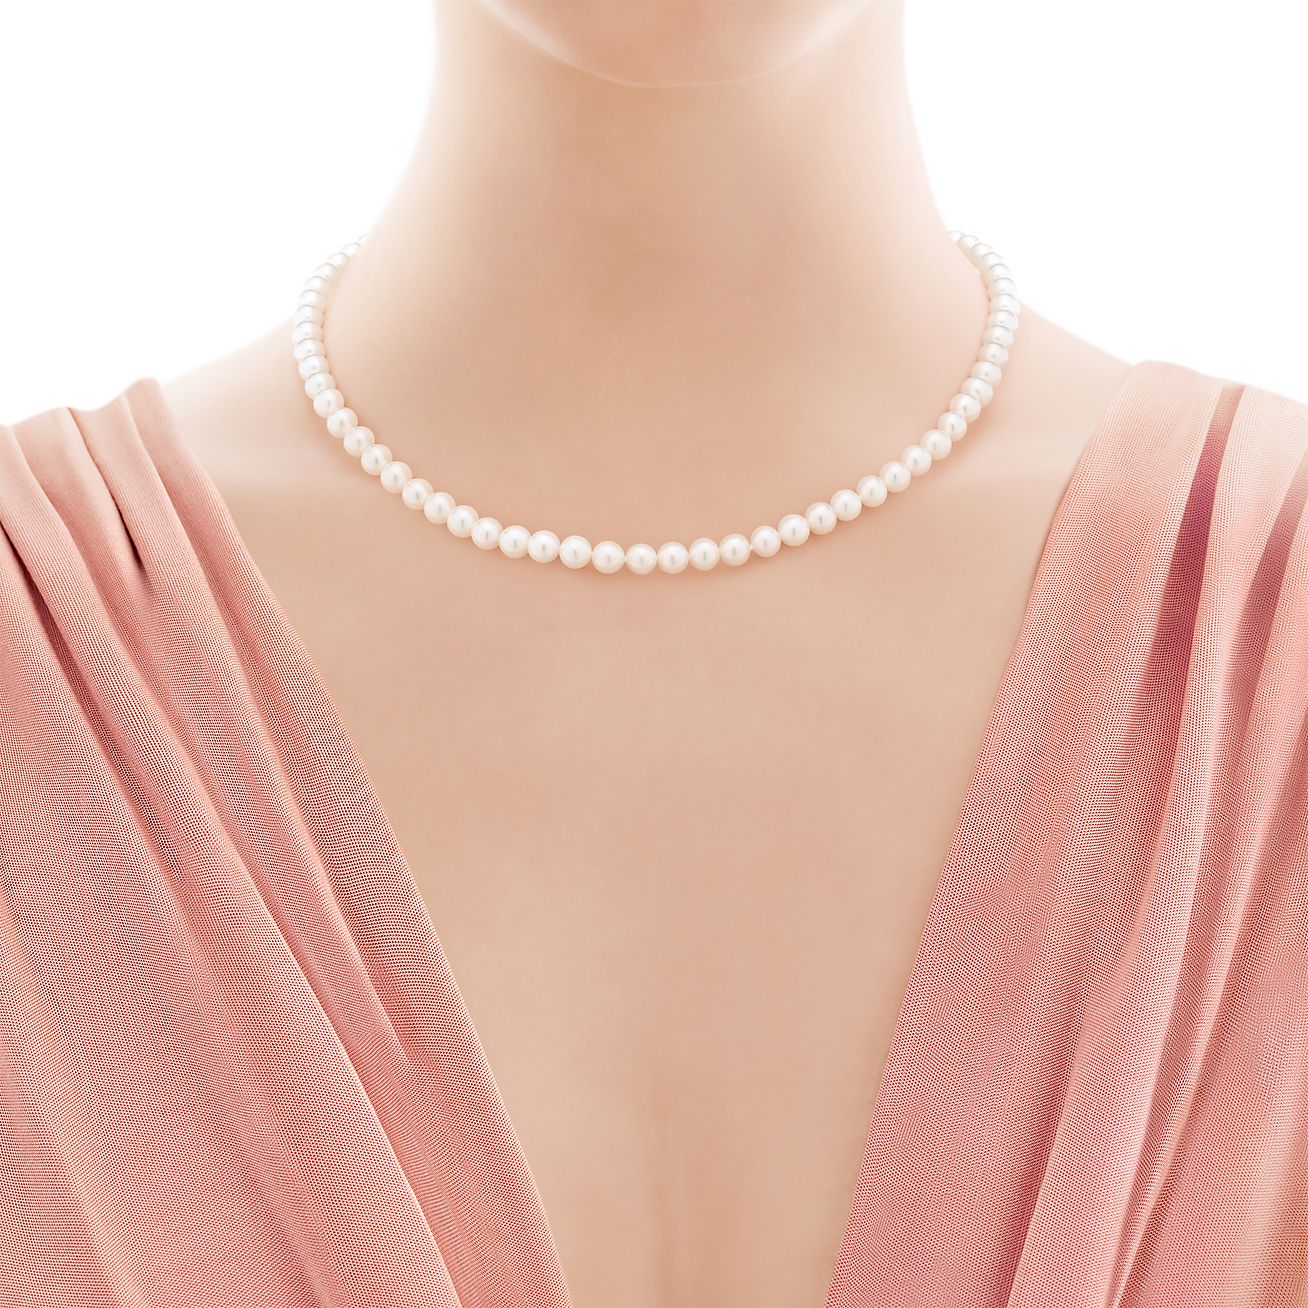 Tiffany South Sea Noble pendant in platinum with a cultured pearl and a  diamond. | Tiffany & Co.